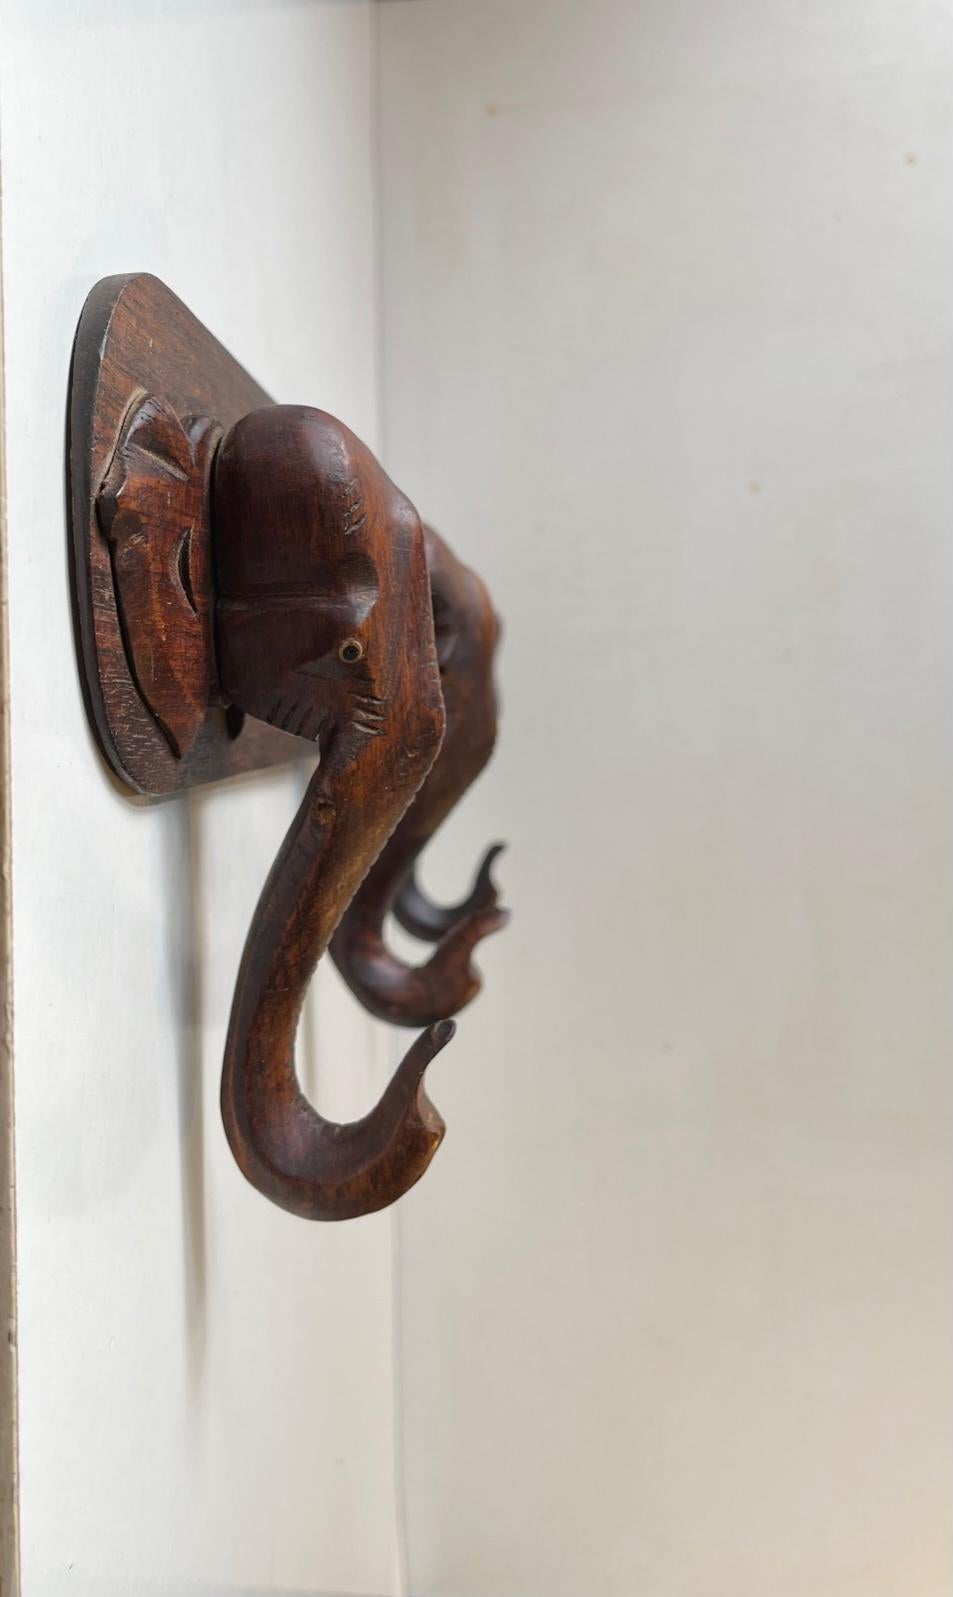 Hand-Carved Elephant Coat or Towel Rack in Dark Wood, 1930s For Sale 2